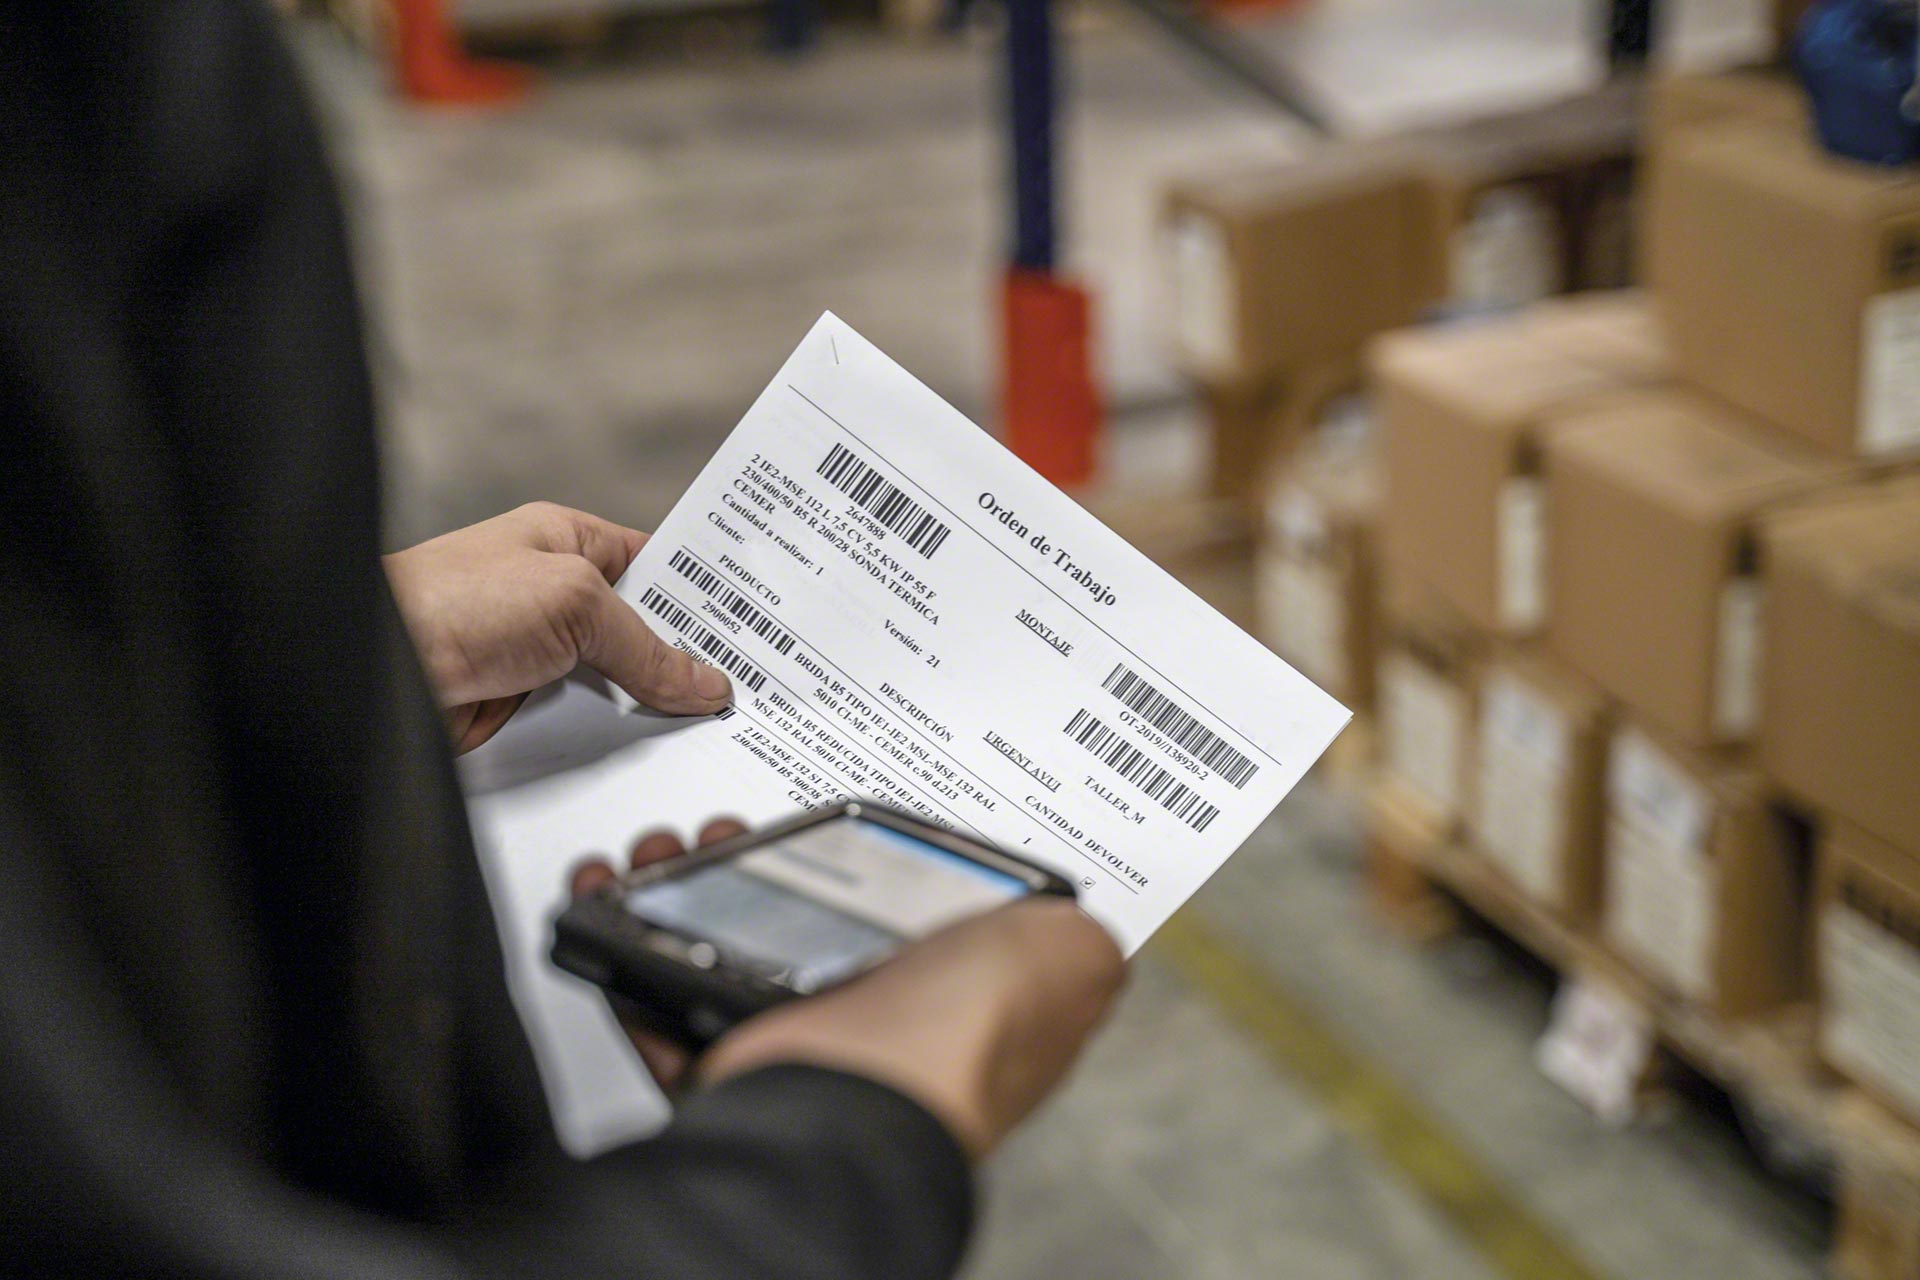 Internal traceability has become an indispensable logistics requirement